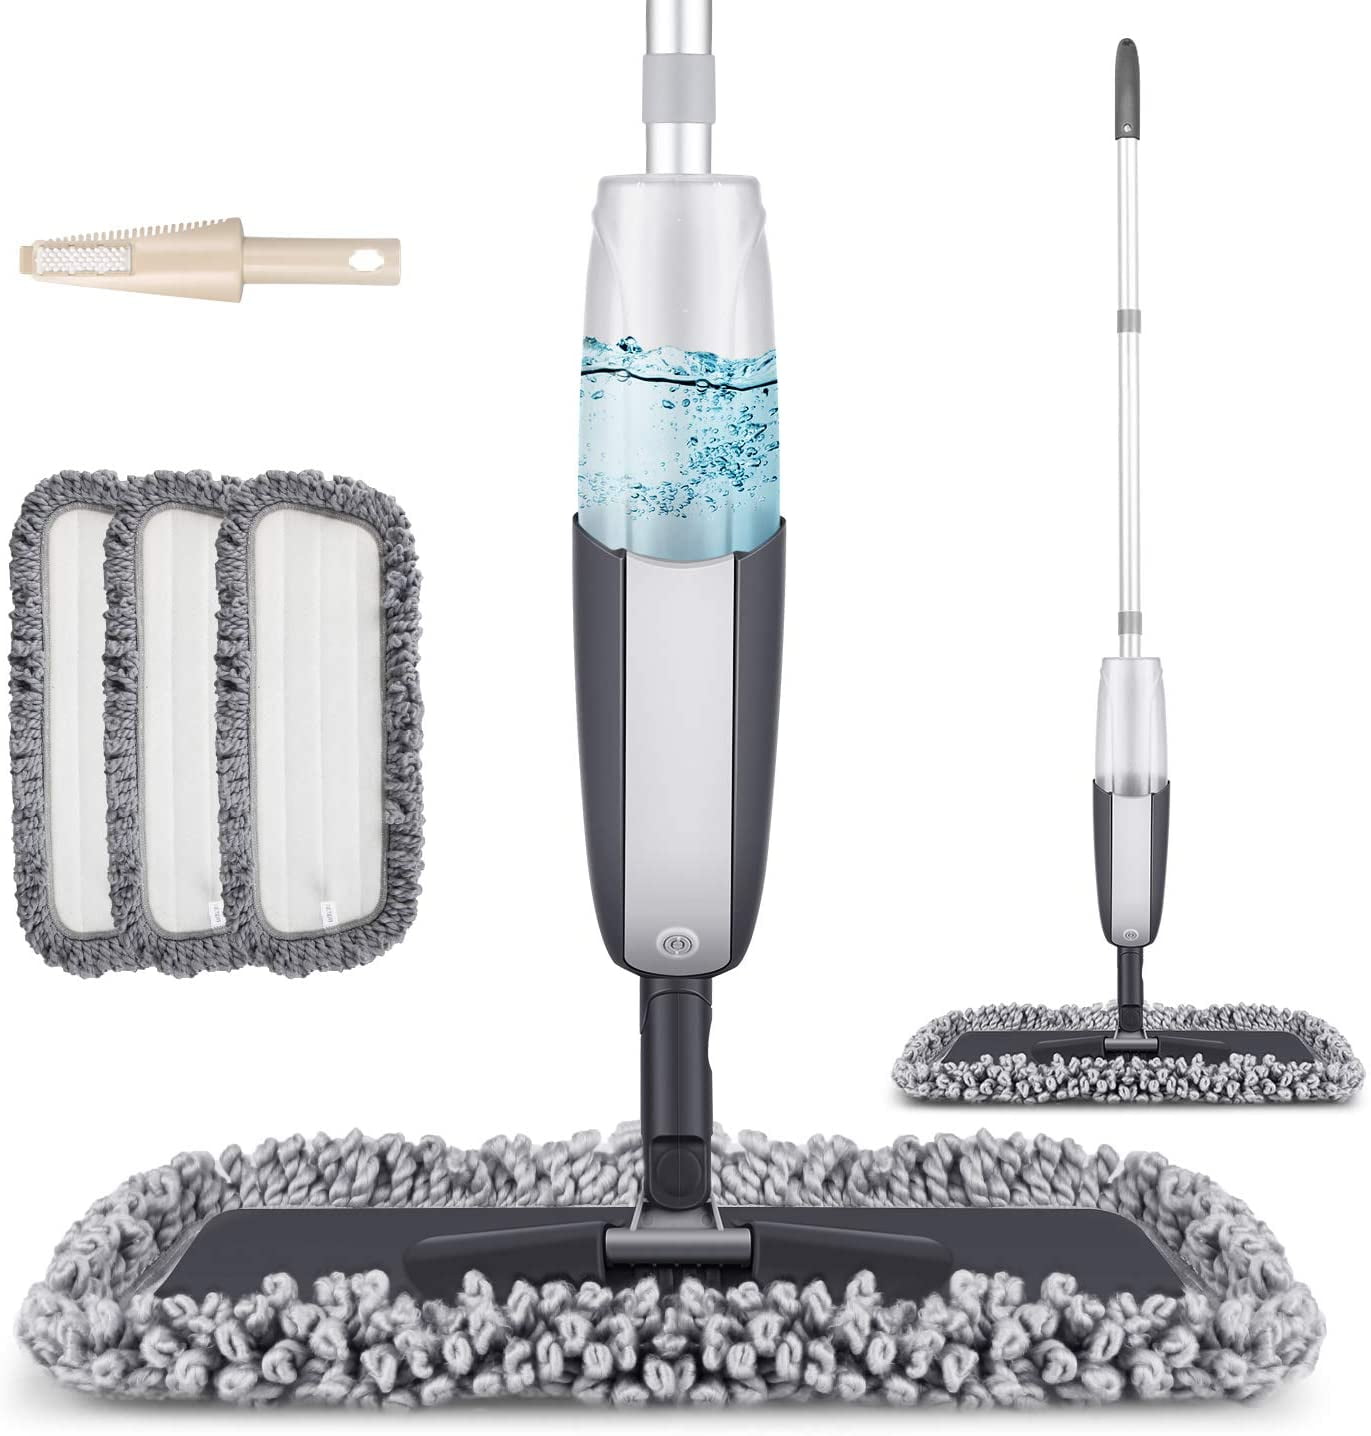 Spray Mop With A Replaceable Mop Head Refillable Bottle Dry - Temu